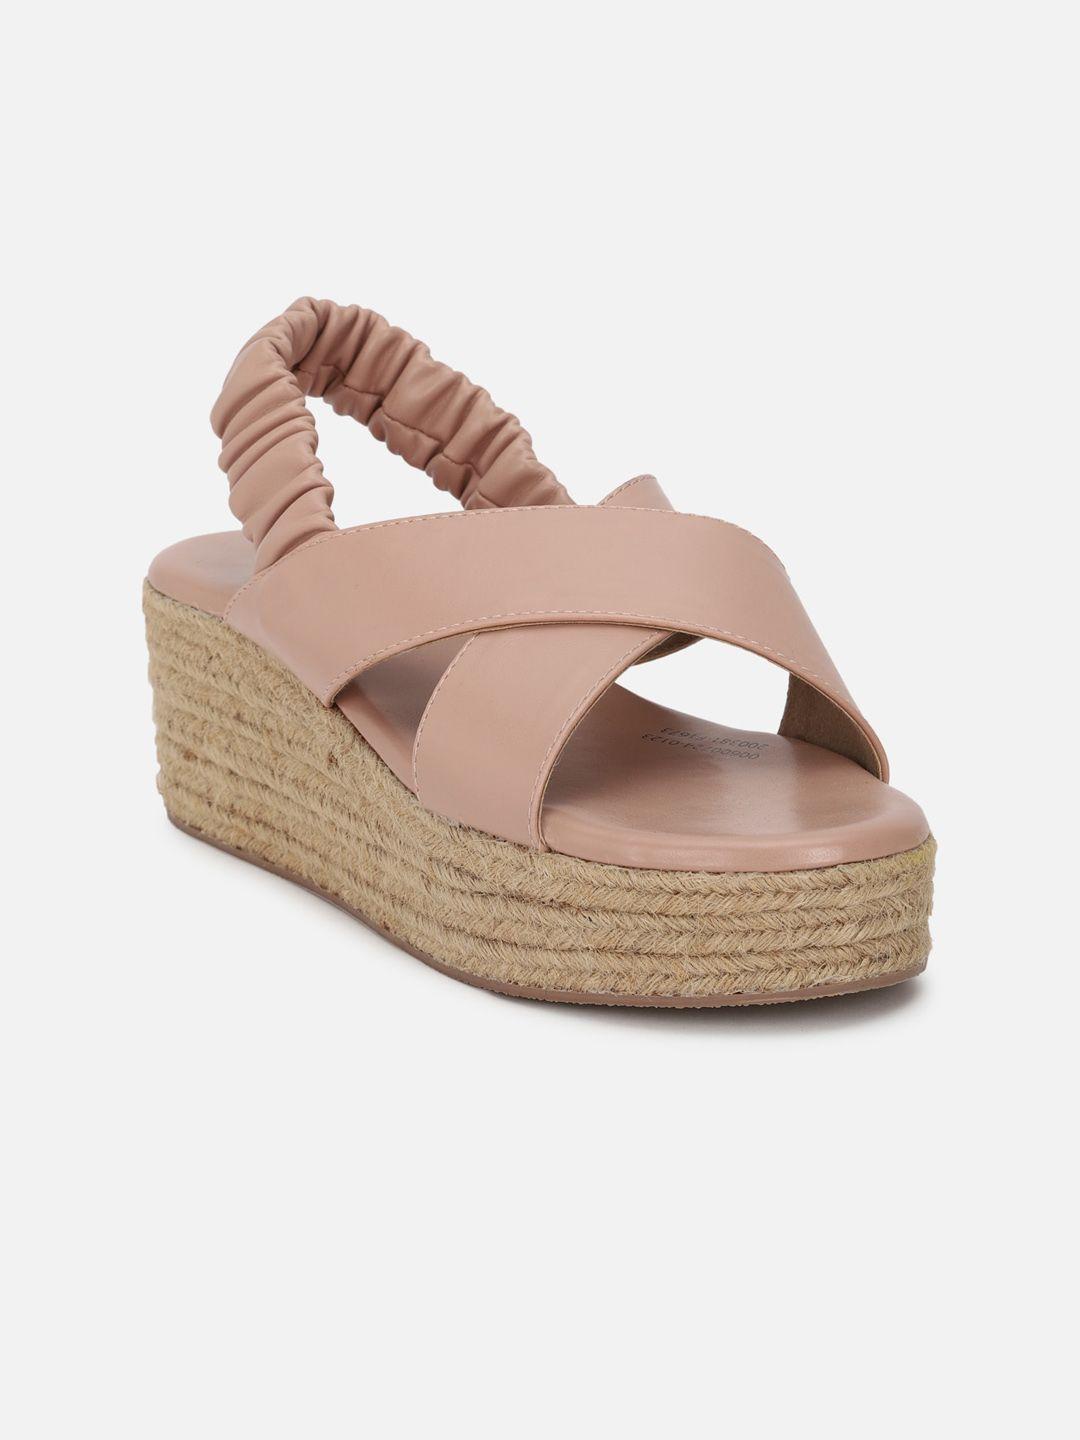 forever 21 peach coloured cross strap open toe wedges with backstrap